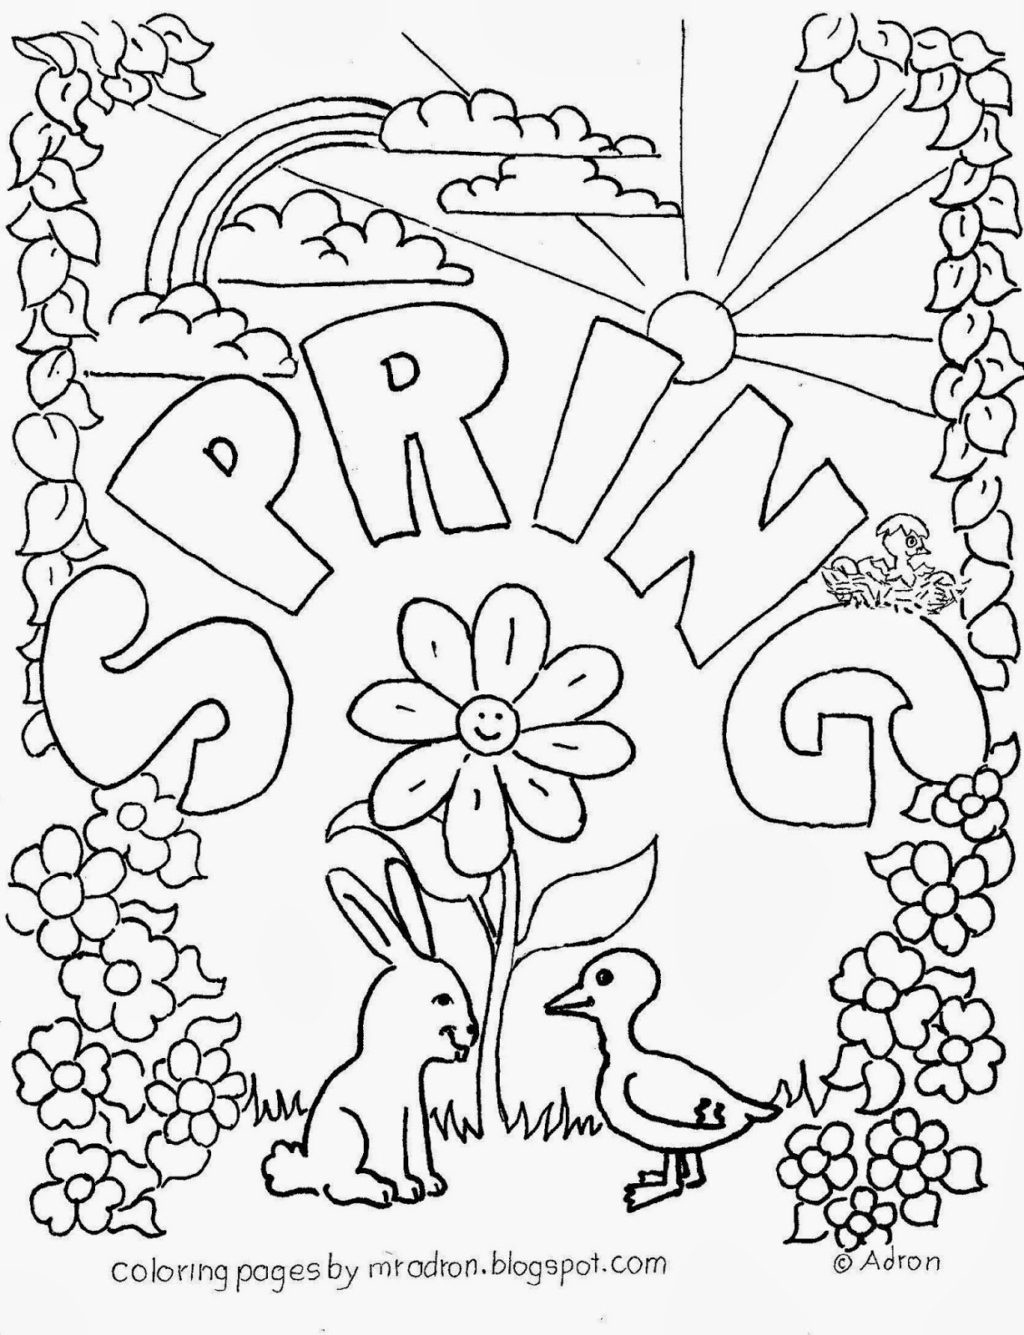 Coloring Book World ~ Enjoyable Design Ideas Free Printablepring - Free Printable Spring Pictures To Color